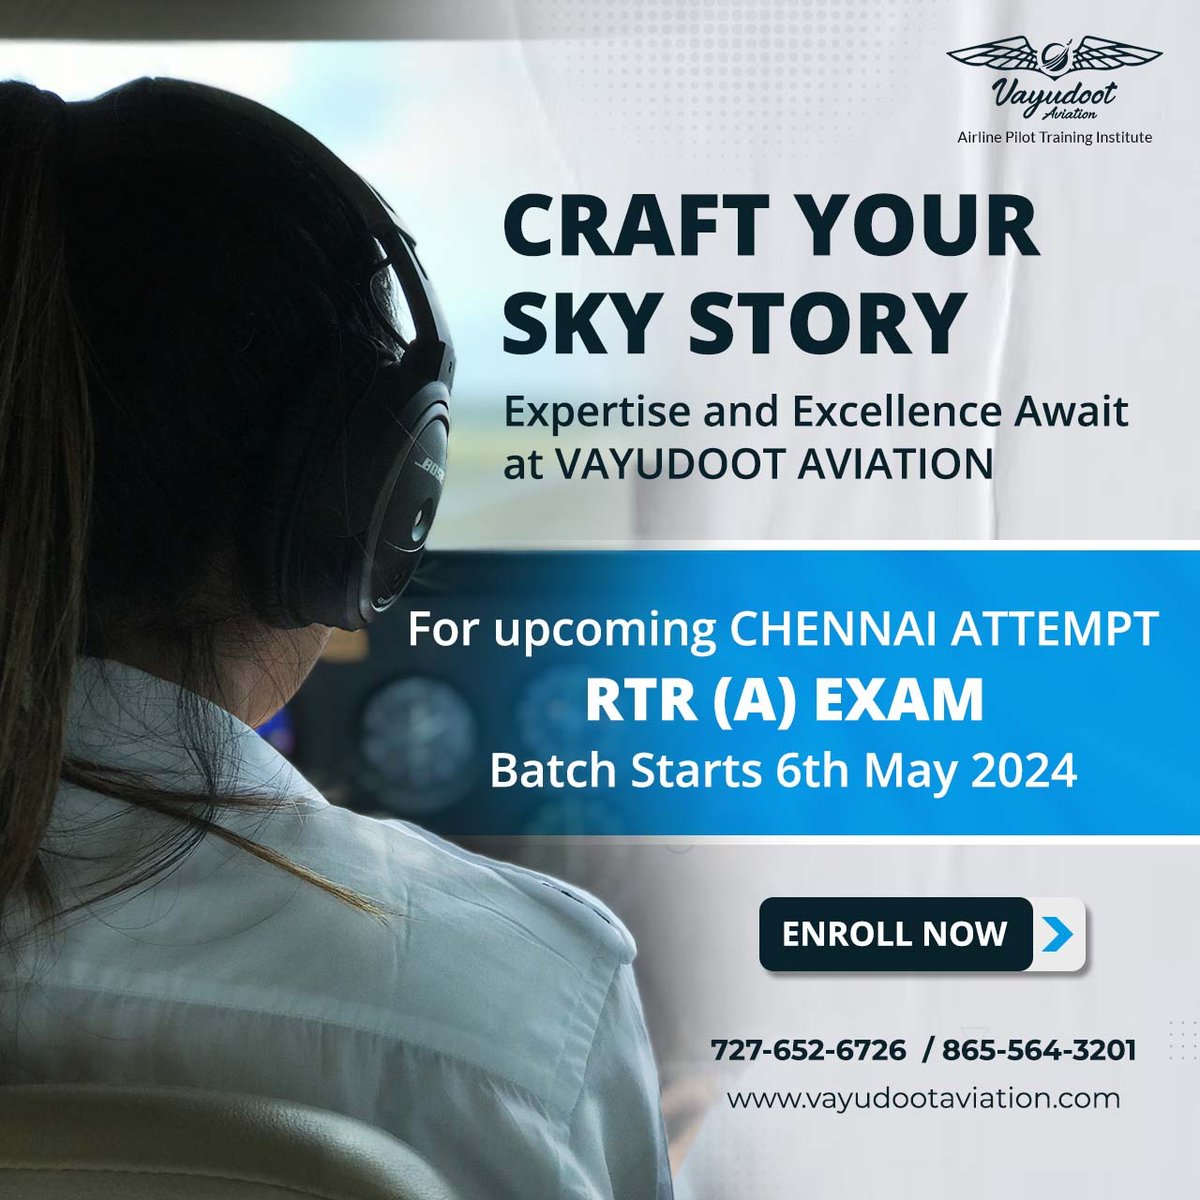 Calling all future aviators!  Secure your spot in our RTR (A) batch for the Chennai attempt.

With specialized headset practice and top-notch training, we'll help you ace the RTR (A) exams.

#RTR(A)Training #Vayuddotaviation #Pilottraining #Education #Cpllicense .